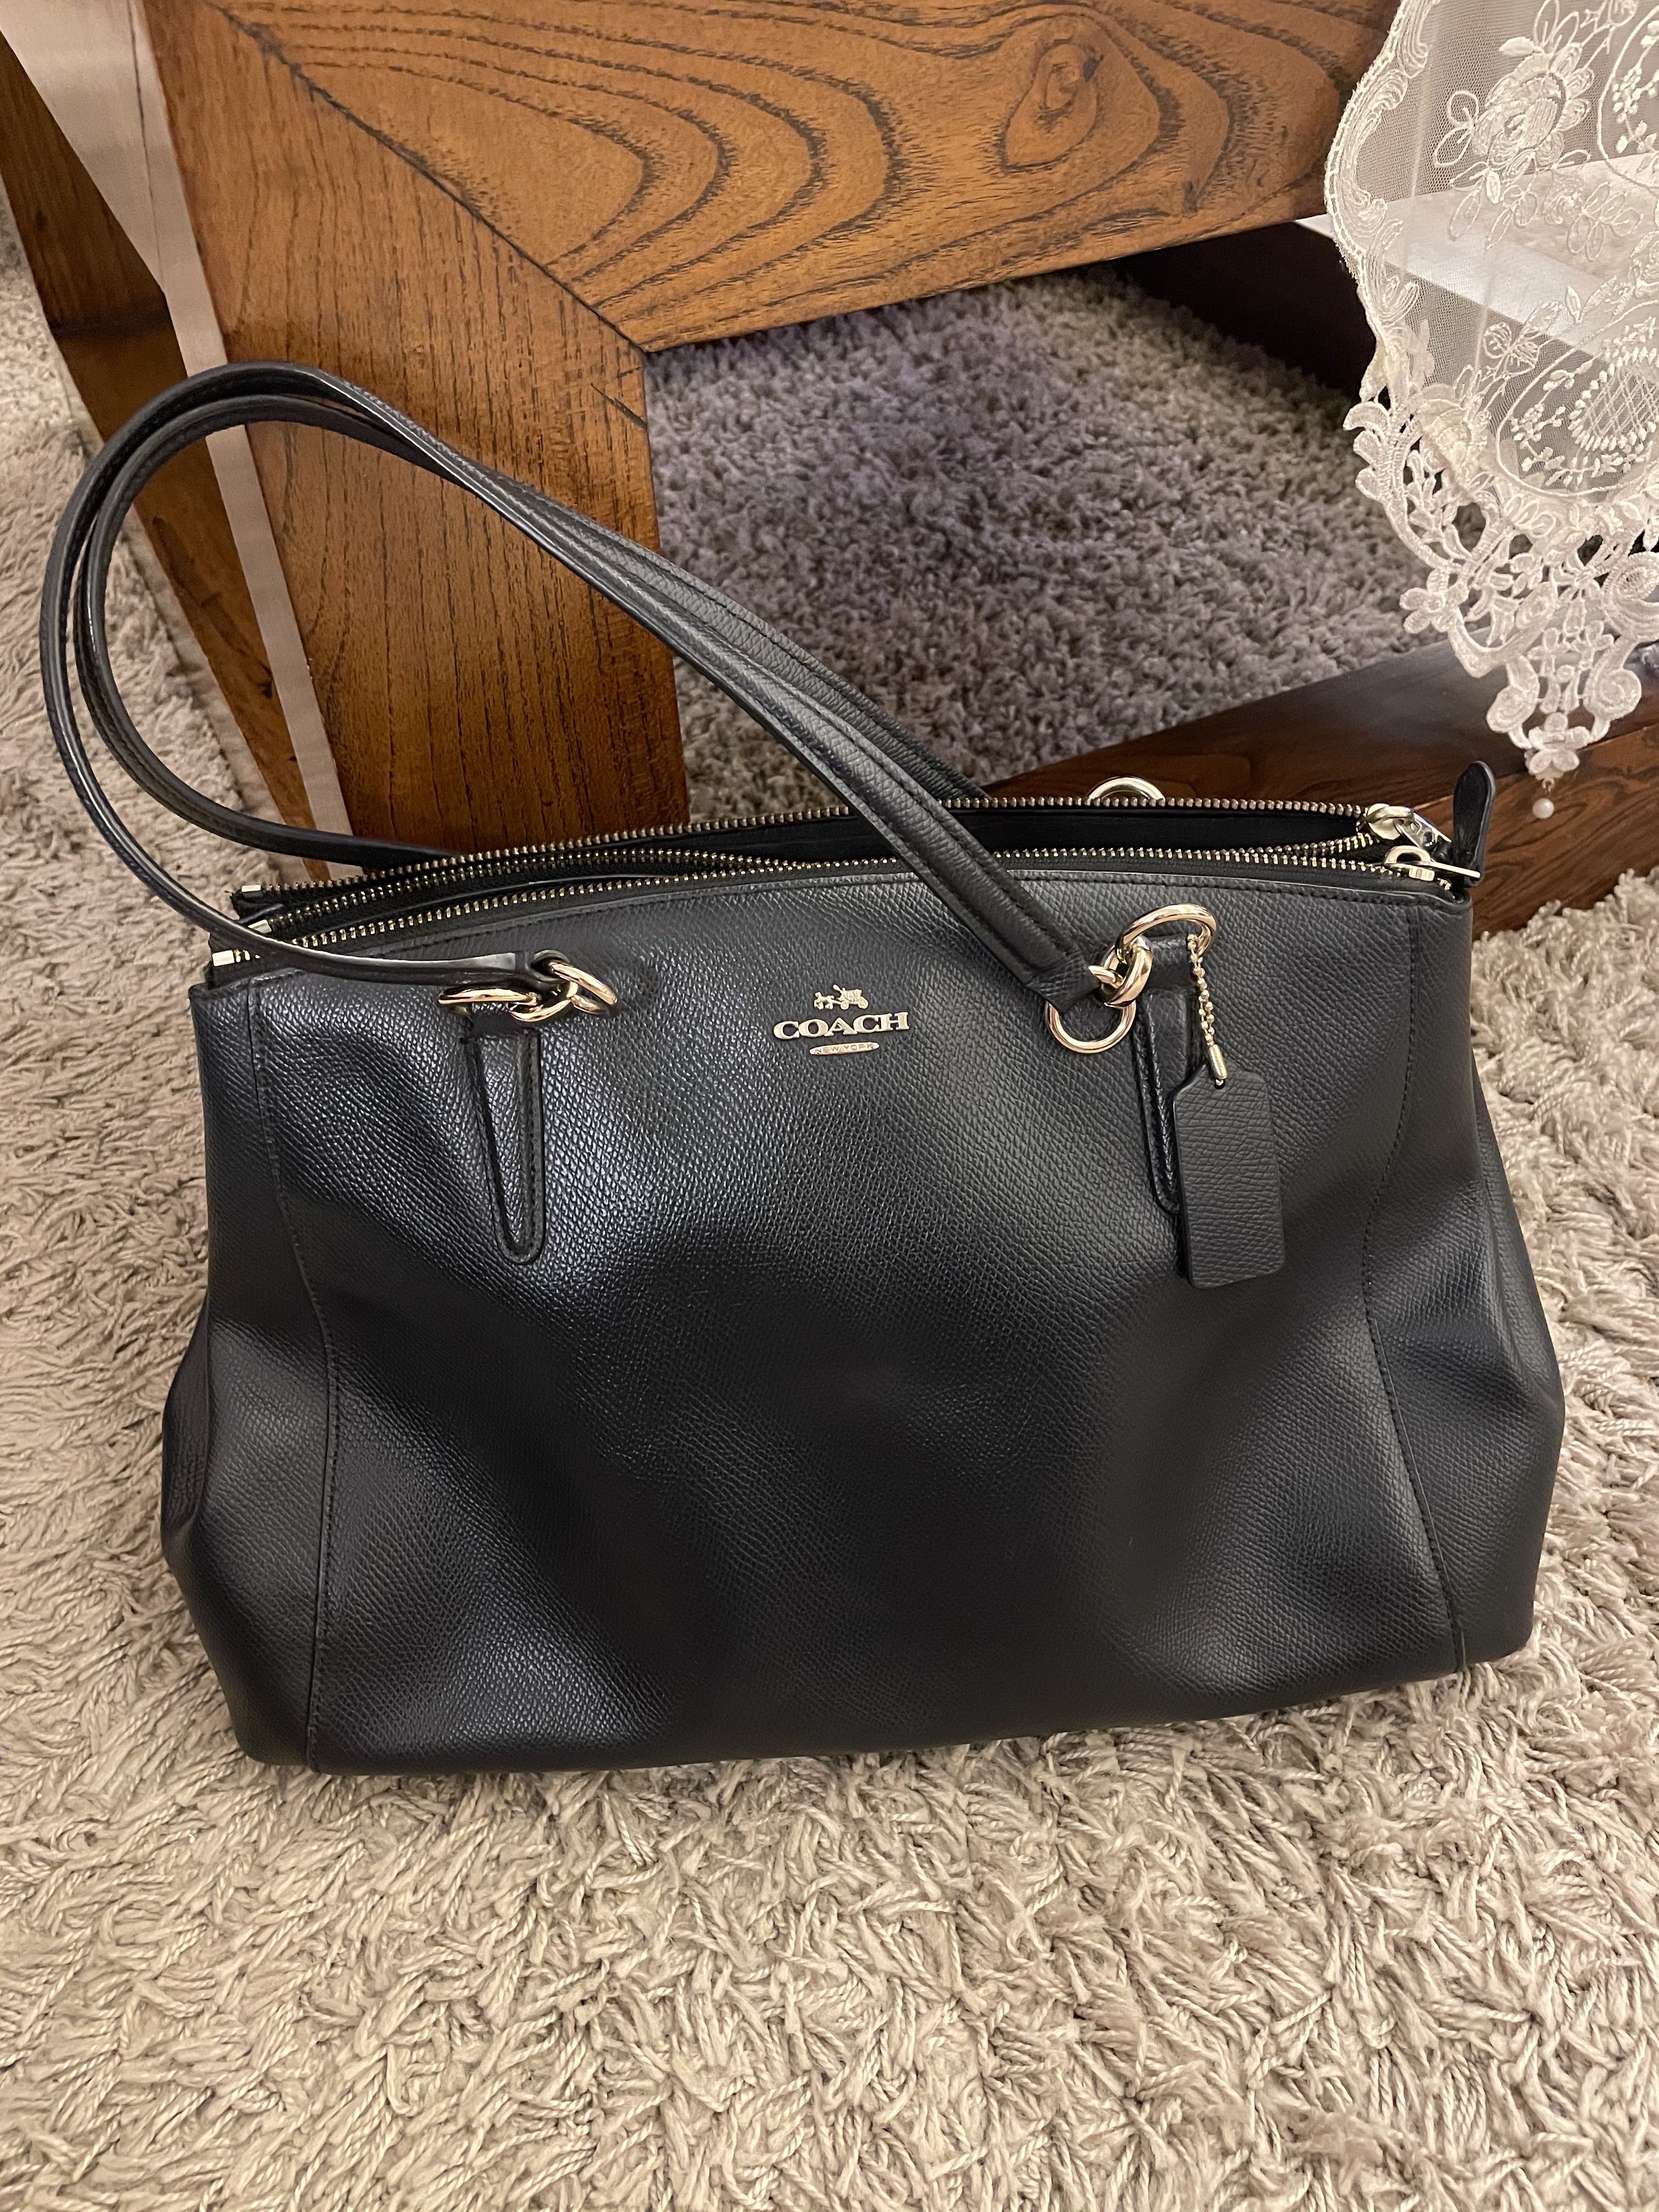 Coach Navy Blue Saffiano Leather Double Zip Tote Coach